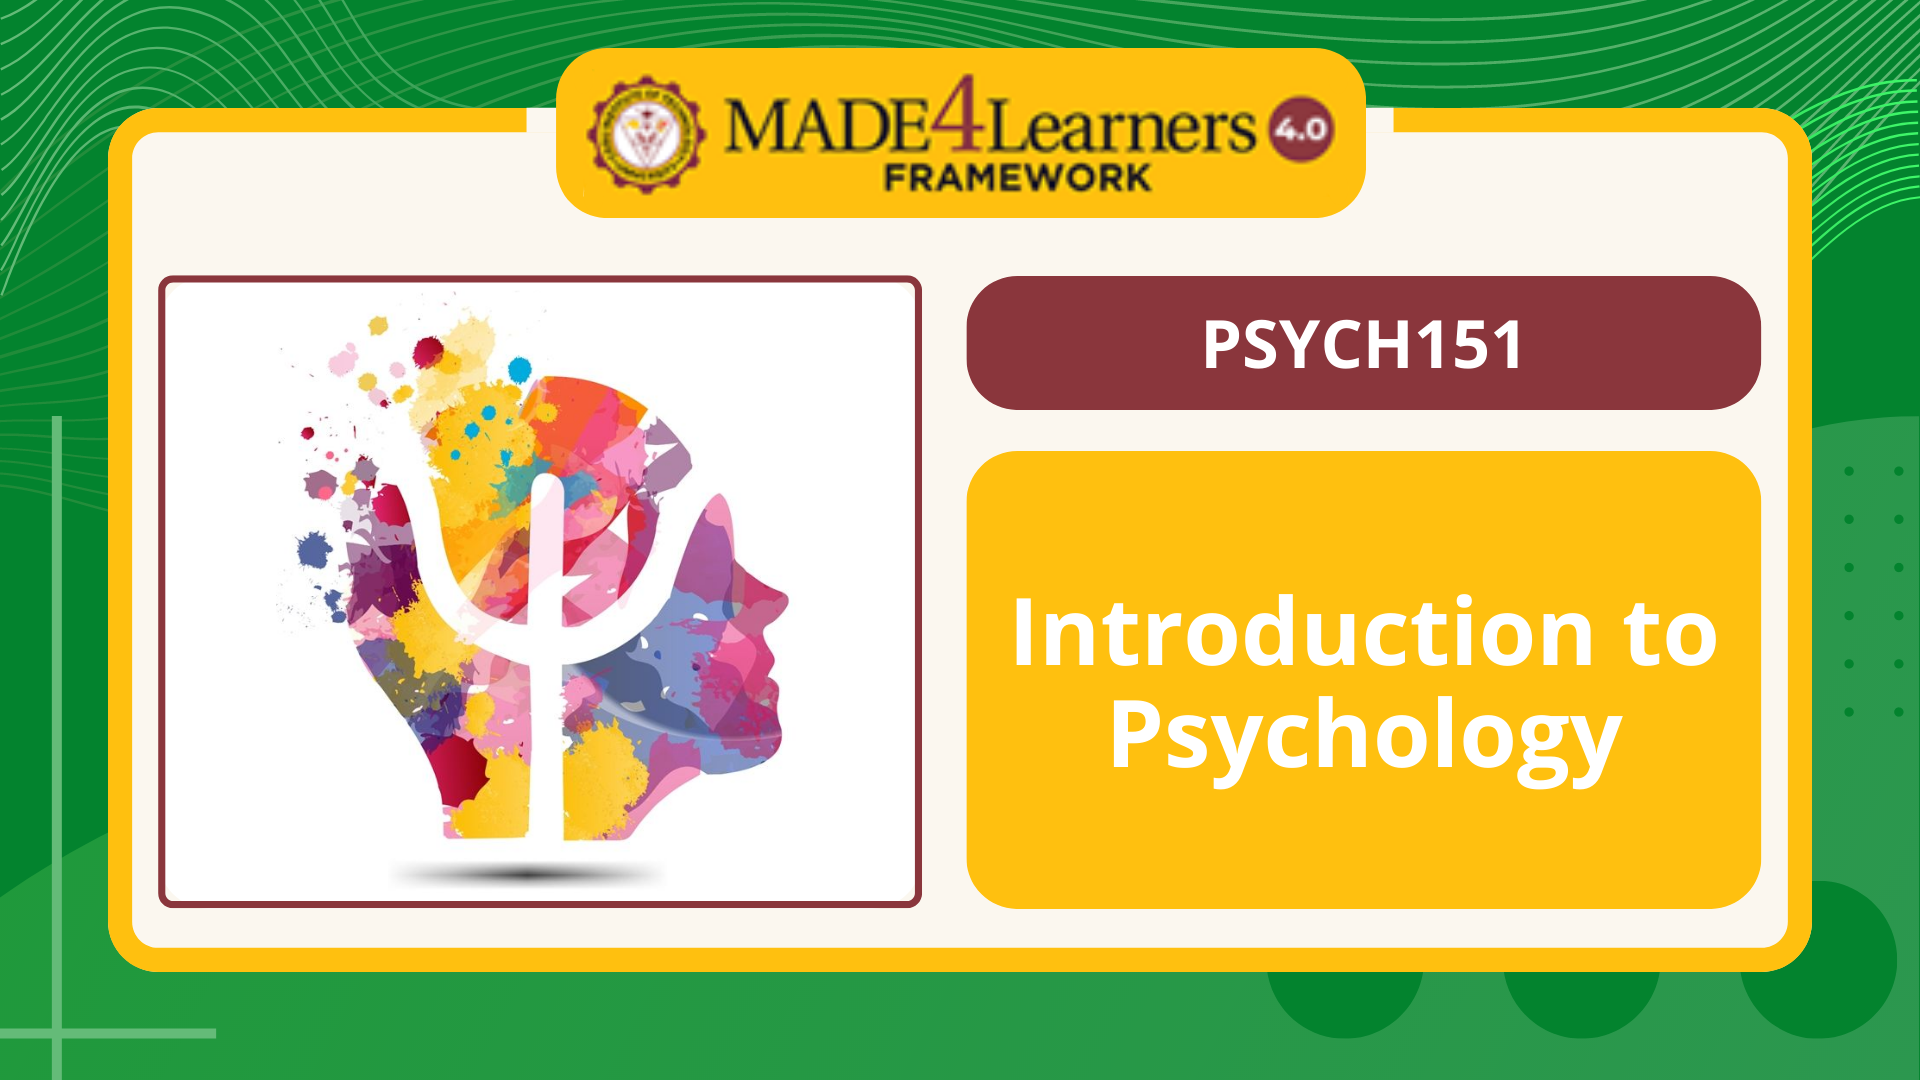 PSYCH151 Introduction to Psychology (E1-C2 AP3)